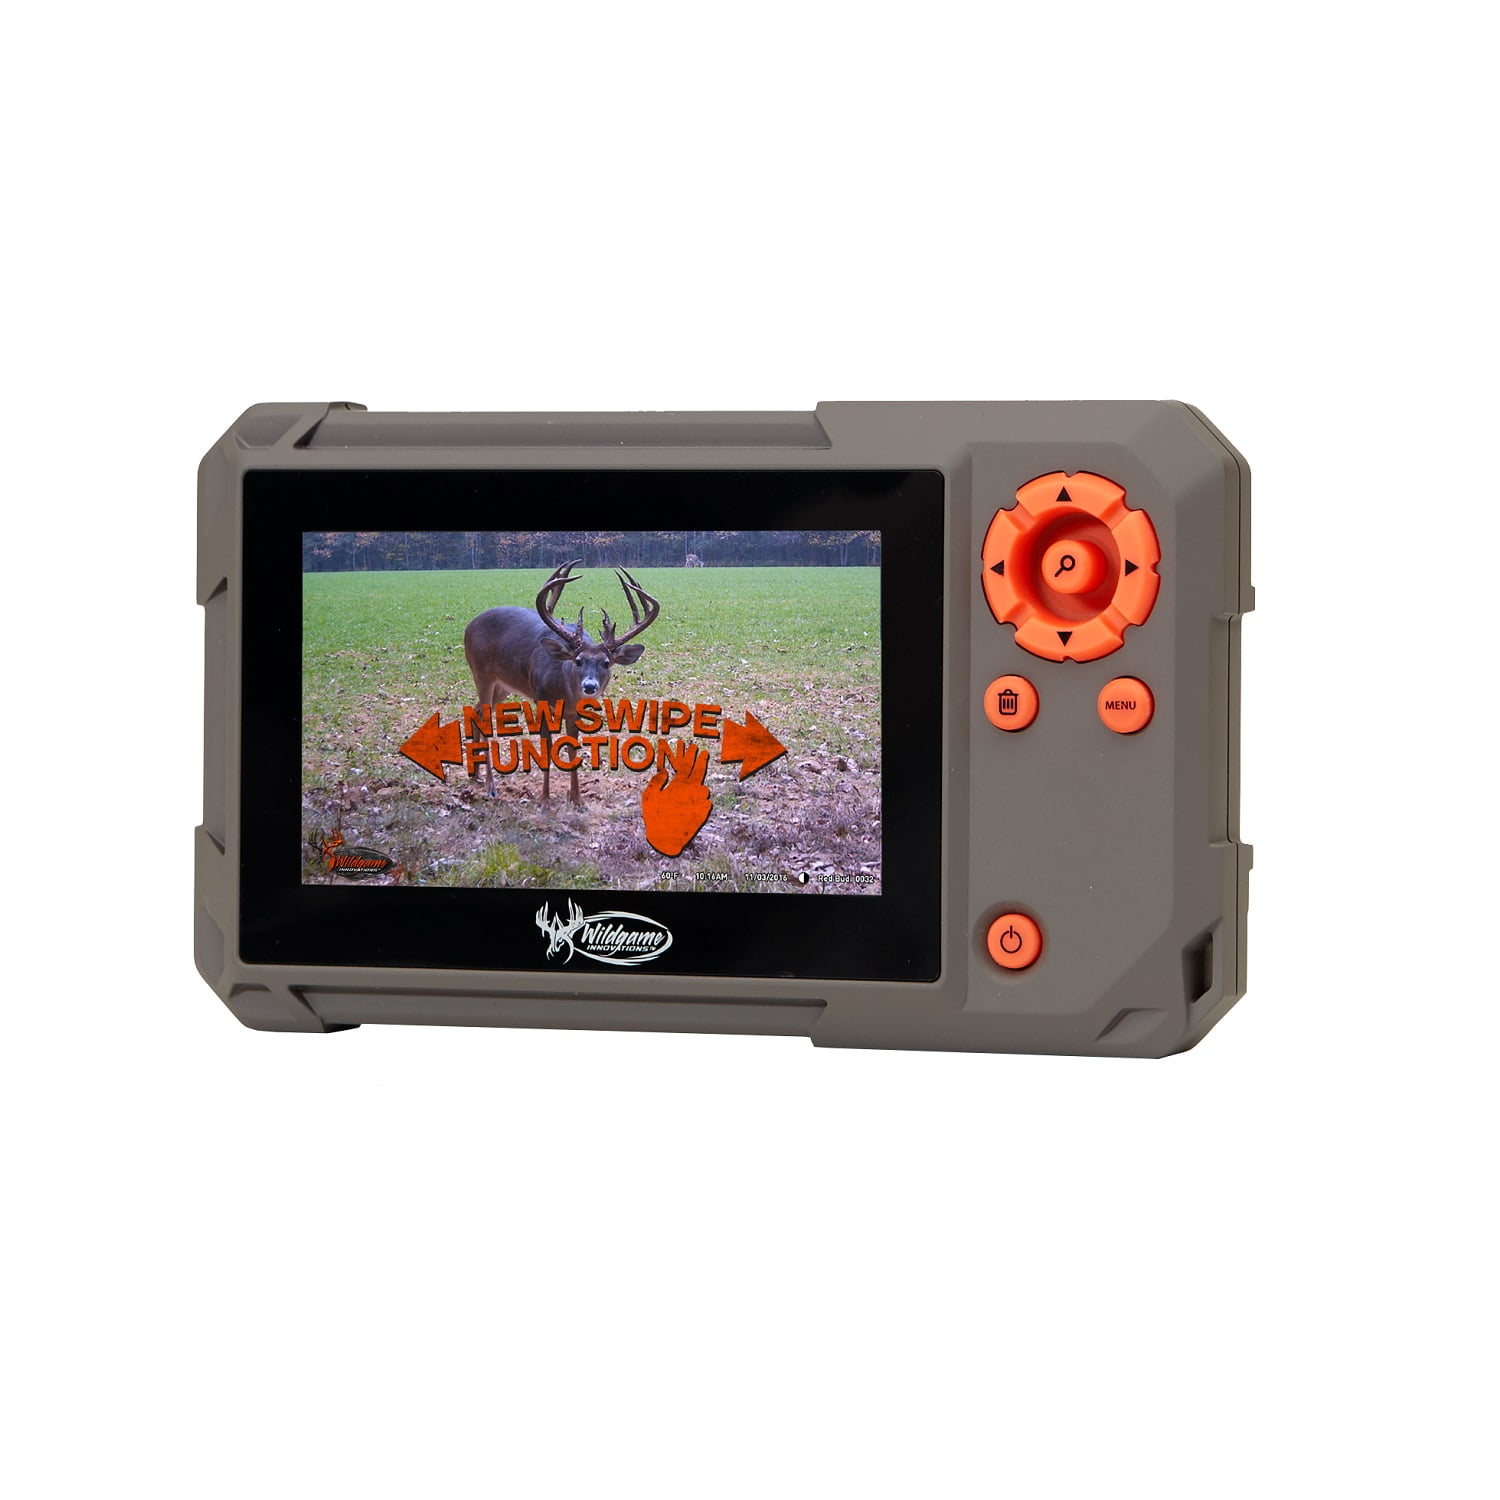 SD Card Reader for Android Smartphone Trail Camera Viewer Plays Deer Hunting G